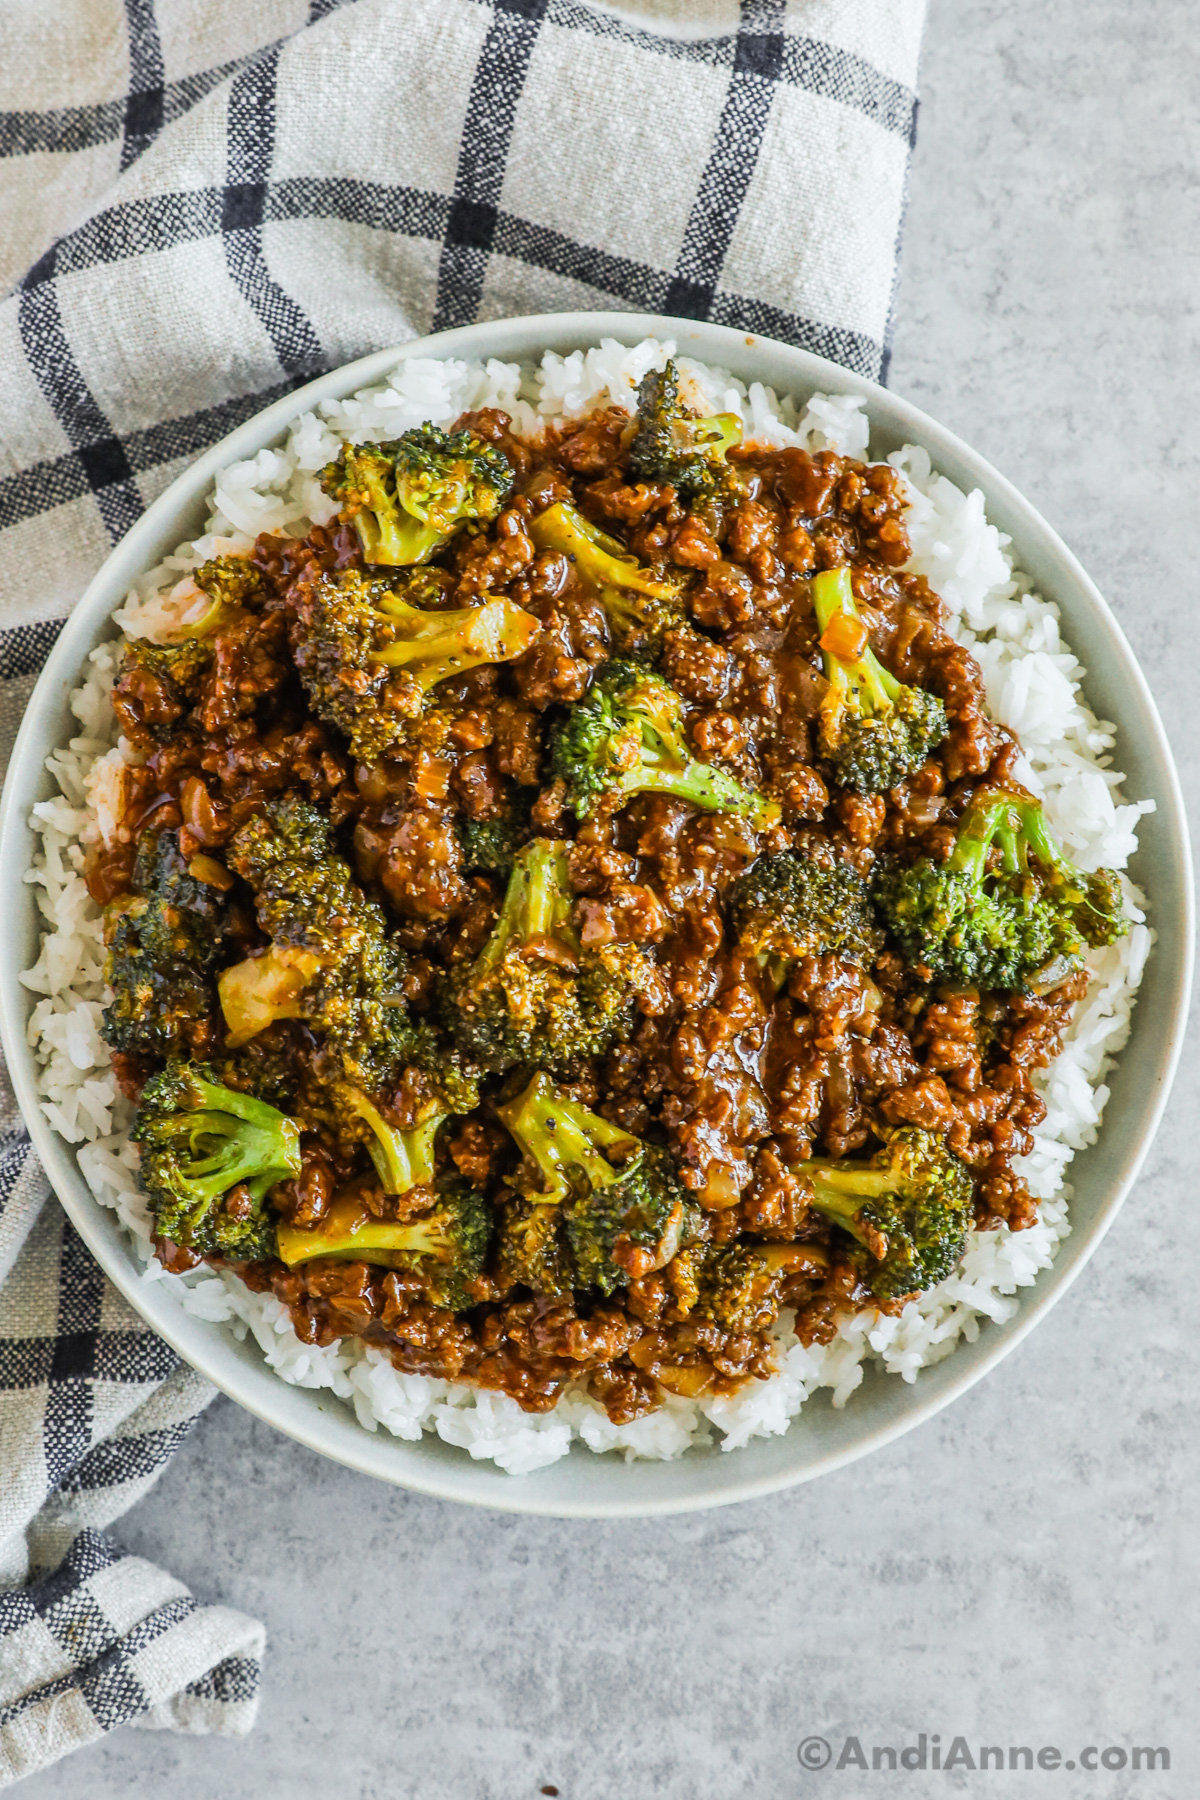 A plate of rice topped with honey garlic sauce with ground beef and broccoli florets.